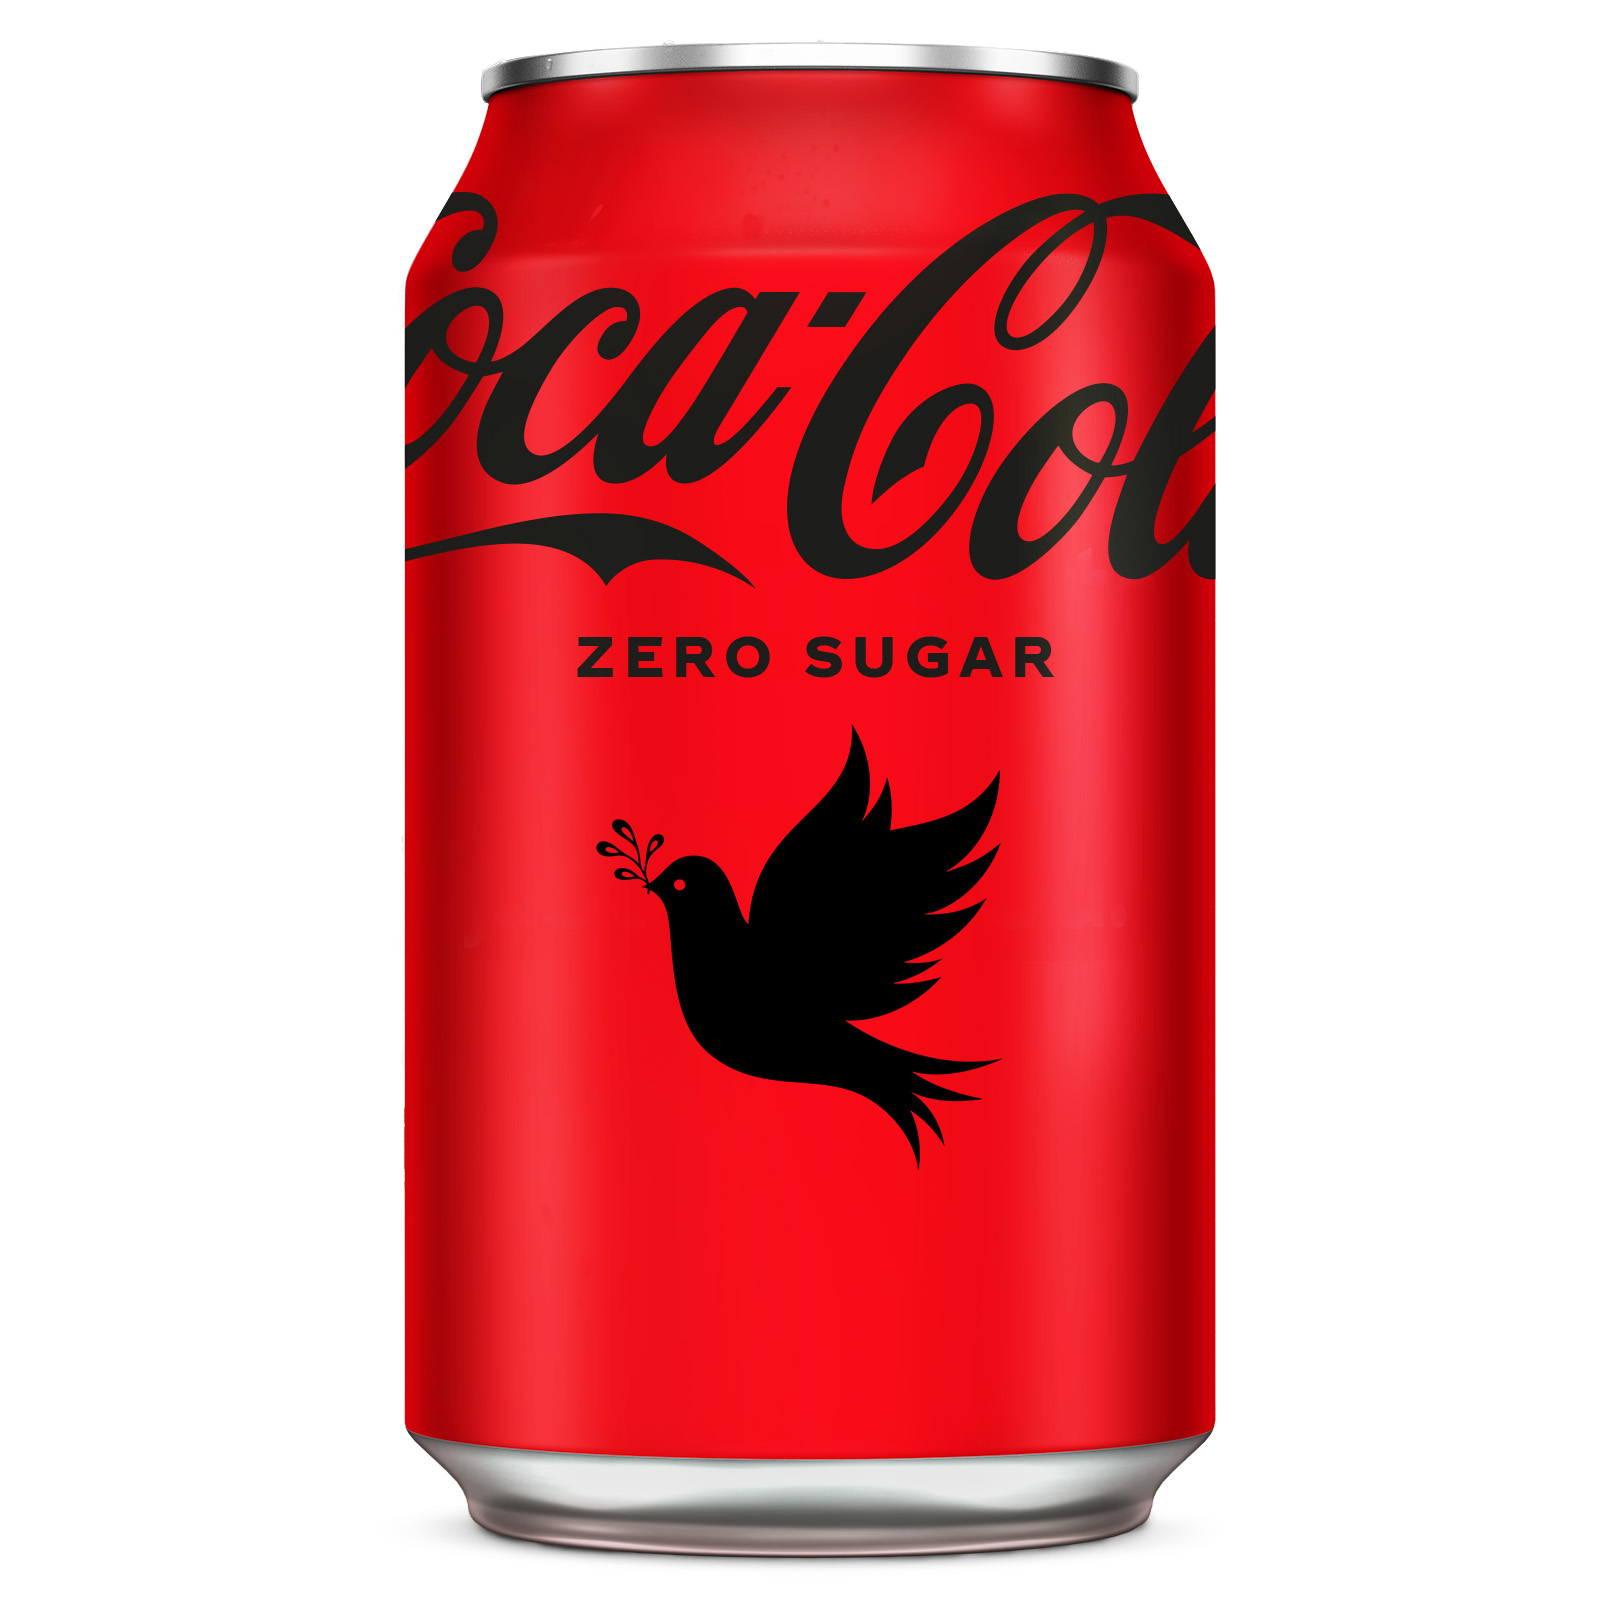 Personalised Coca Cola can including your message